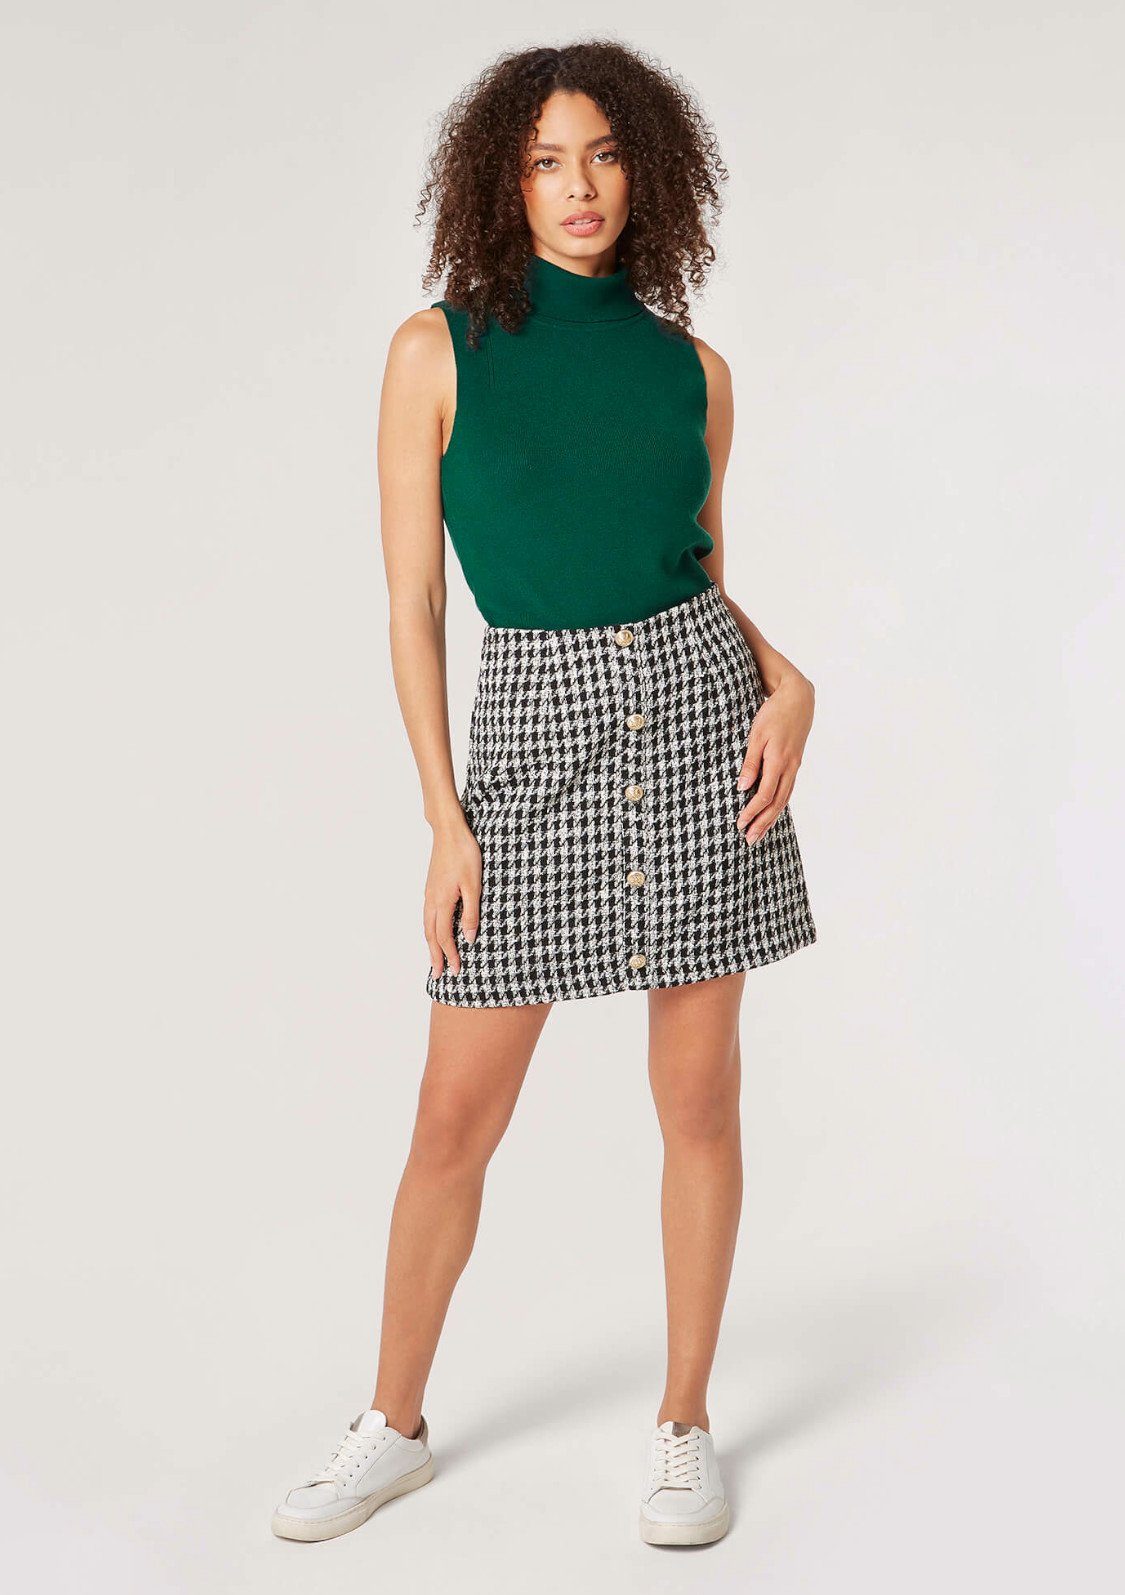 Button Hahnentrittmuster mit Skirt Gold Minirock Dogtooth (1-tlg) Apricot